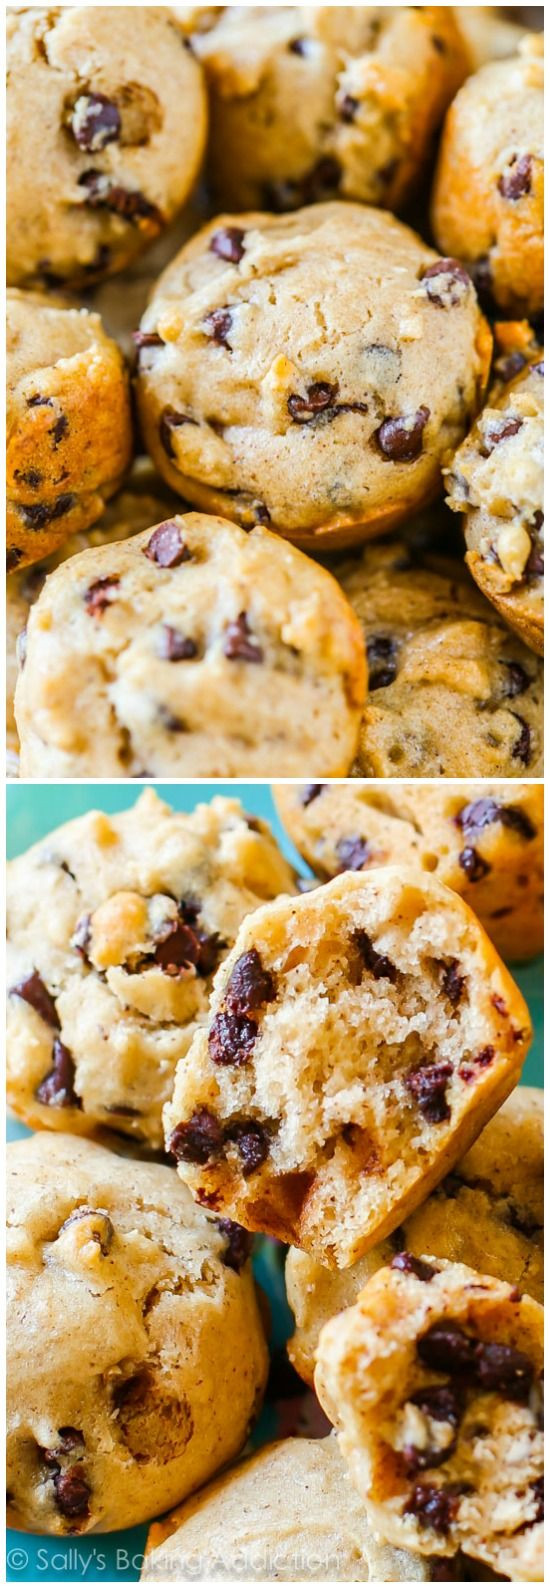 Low Calorie Chocolate Chip Muffins
 45 Calorie Mini Chocolate Chip Muffins A low calorie mini